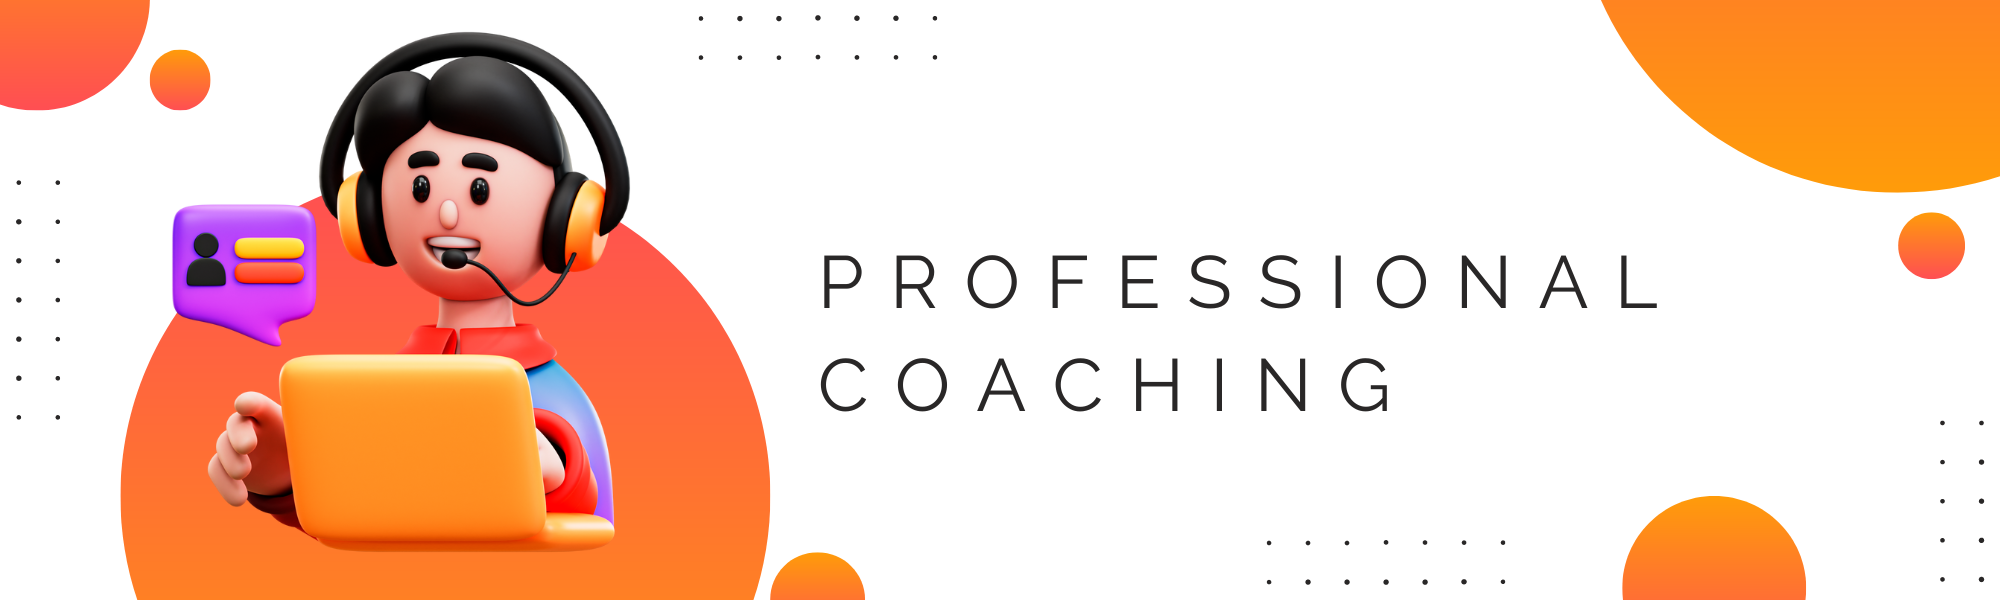 White And Orange Professional Business Coach LinkedIn Banner